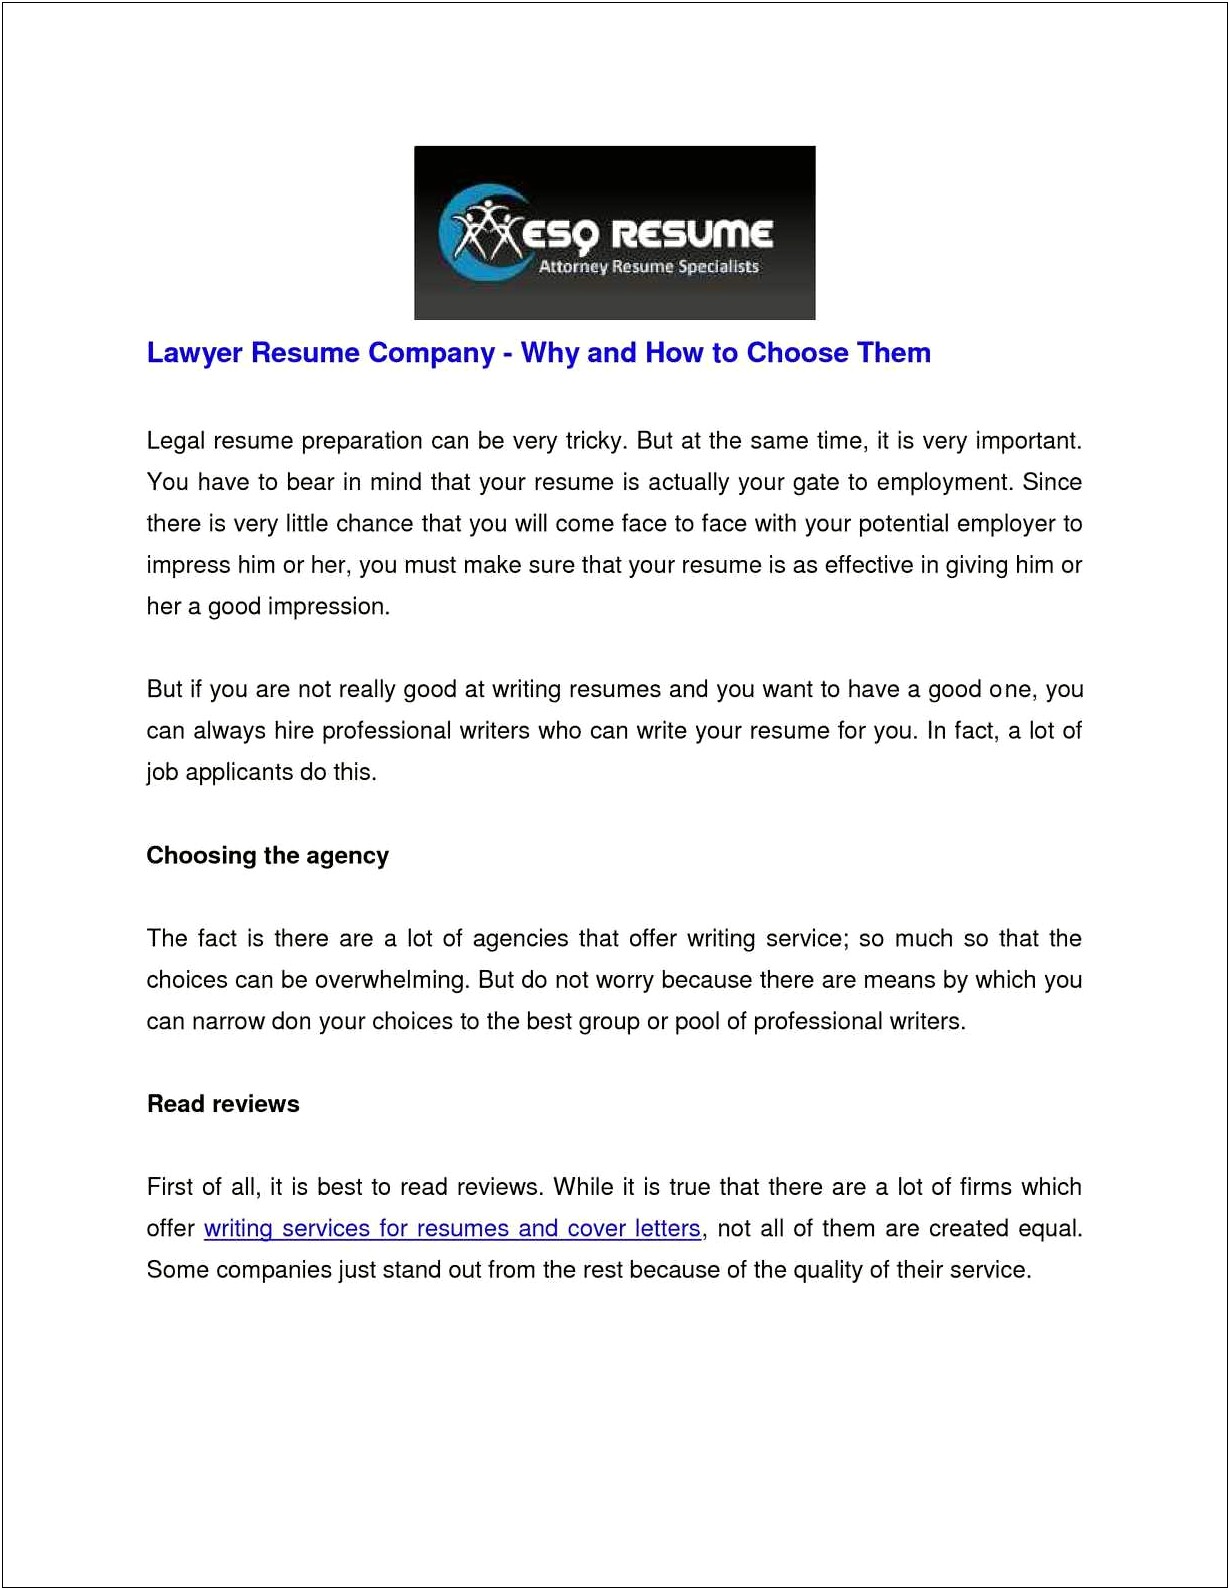 Resume And Cover Letter Writing Services Reviews